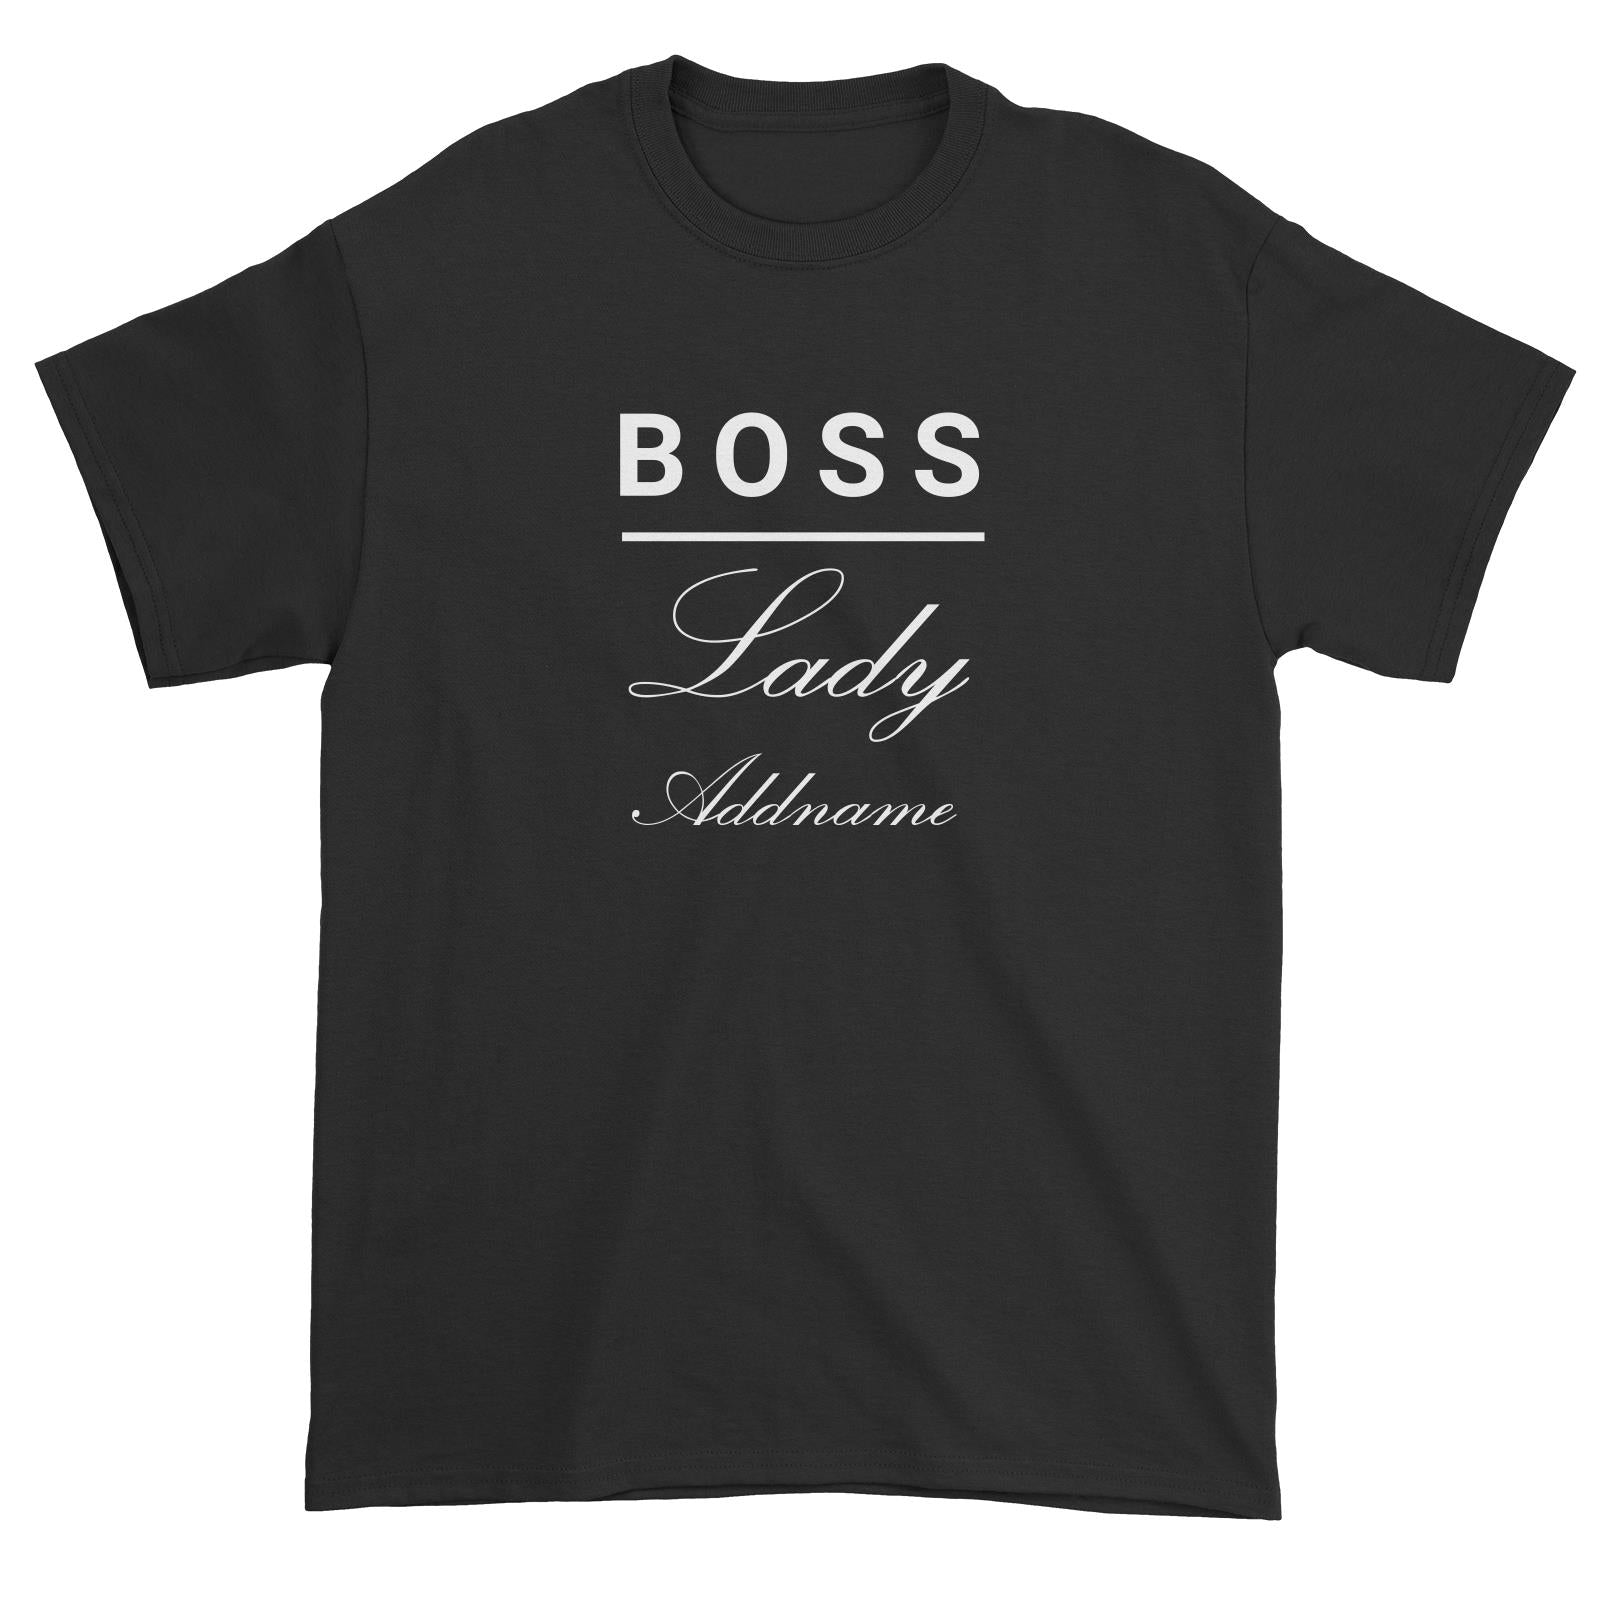 Boss Lady Addname Unisex T-Shirt  Matching Family Personalizable Designs